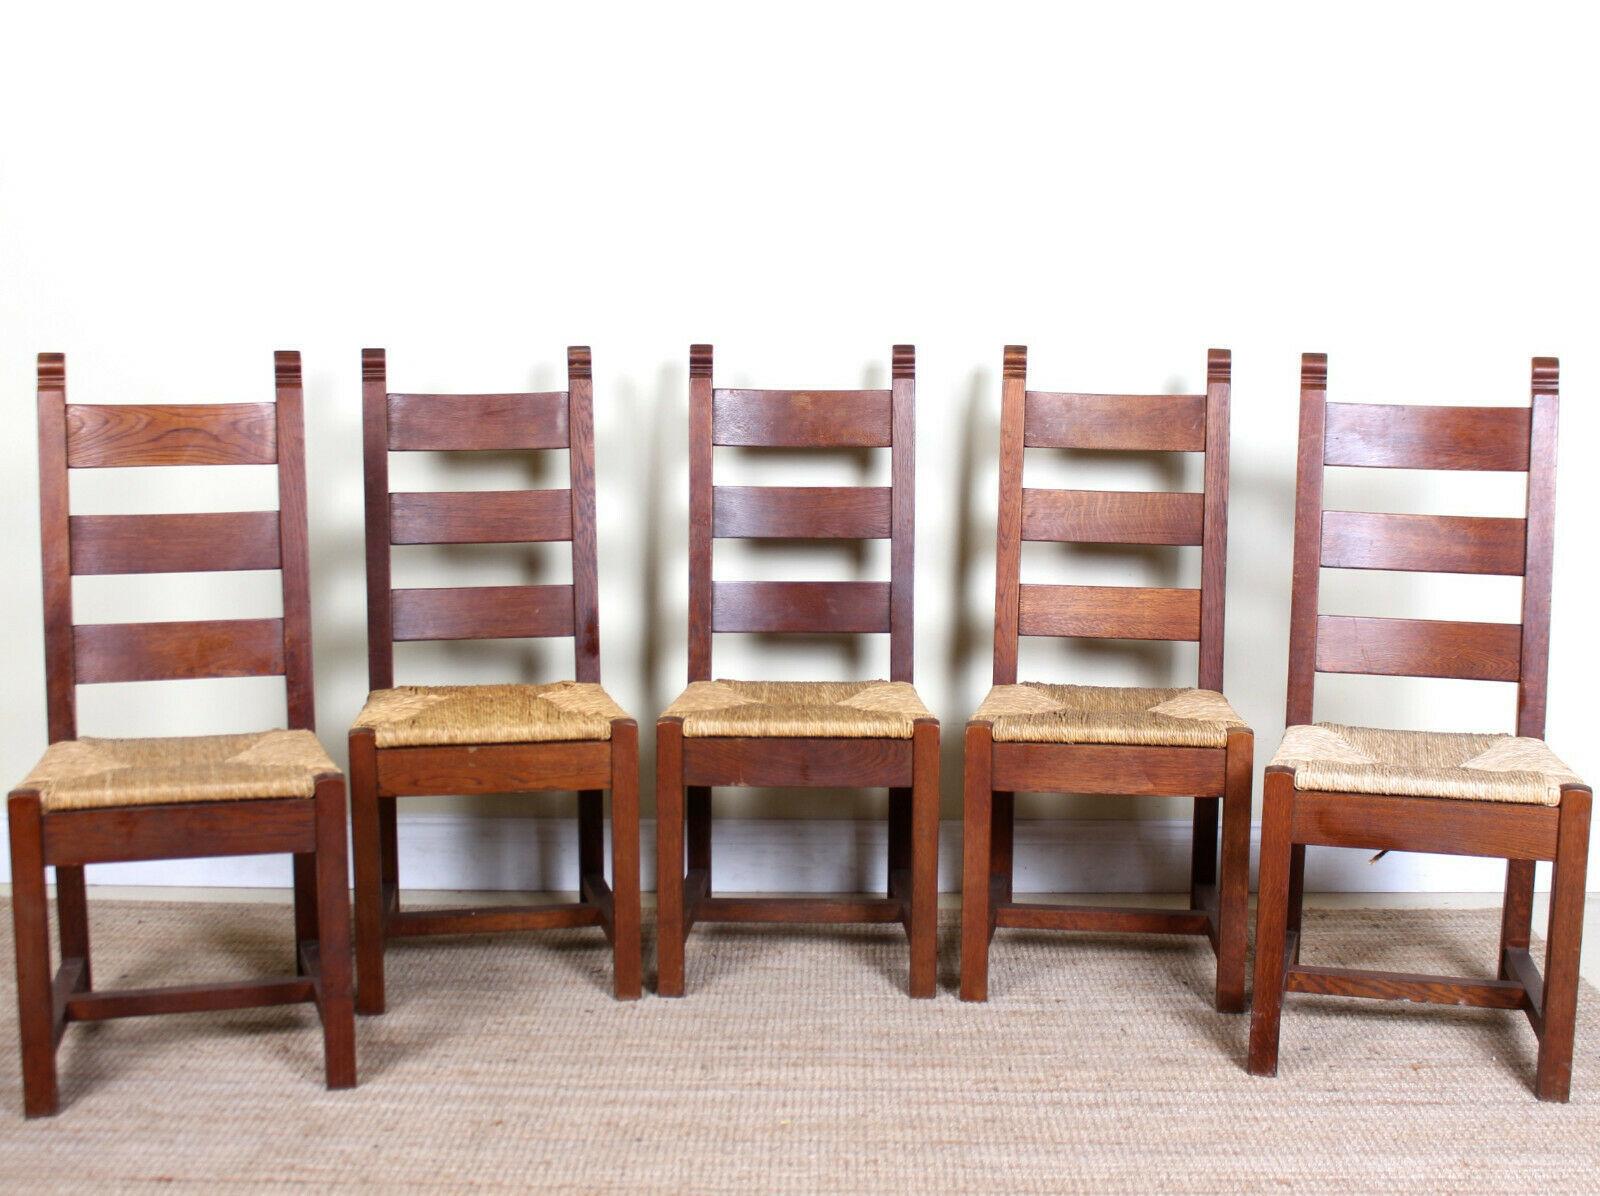 country rustic dining room sets